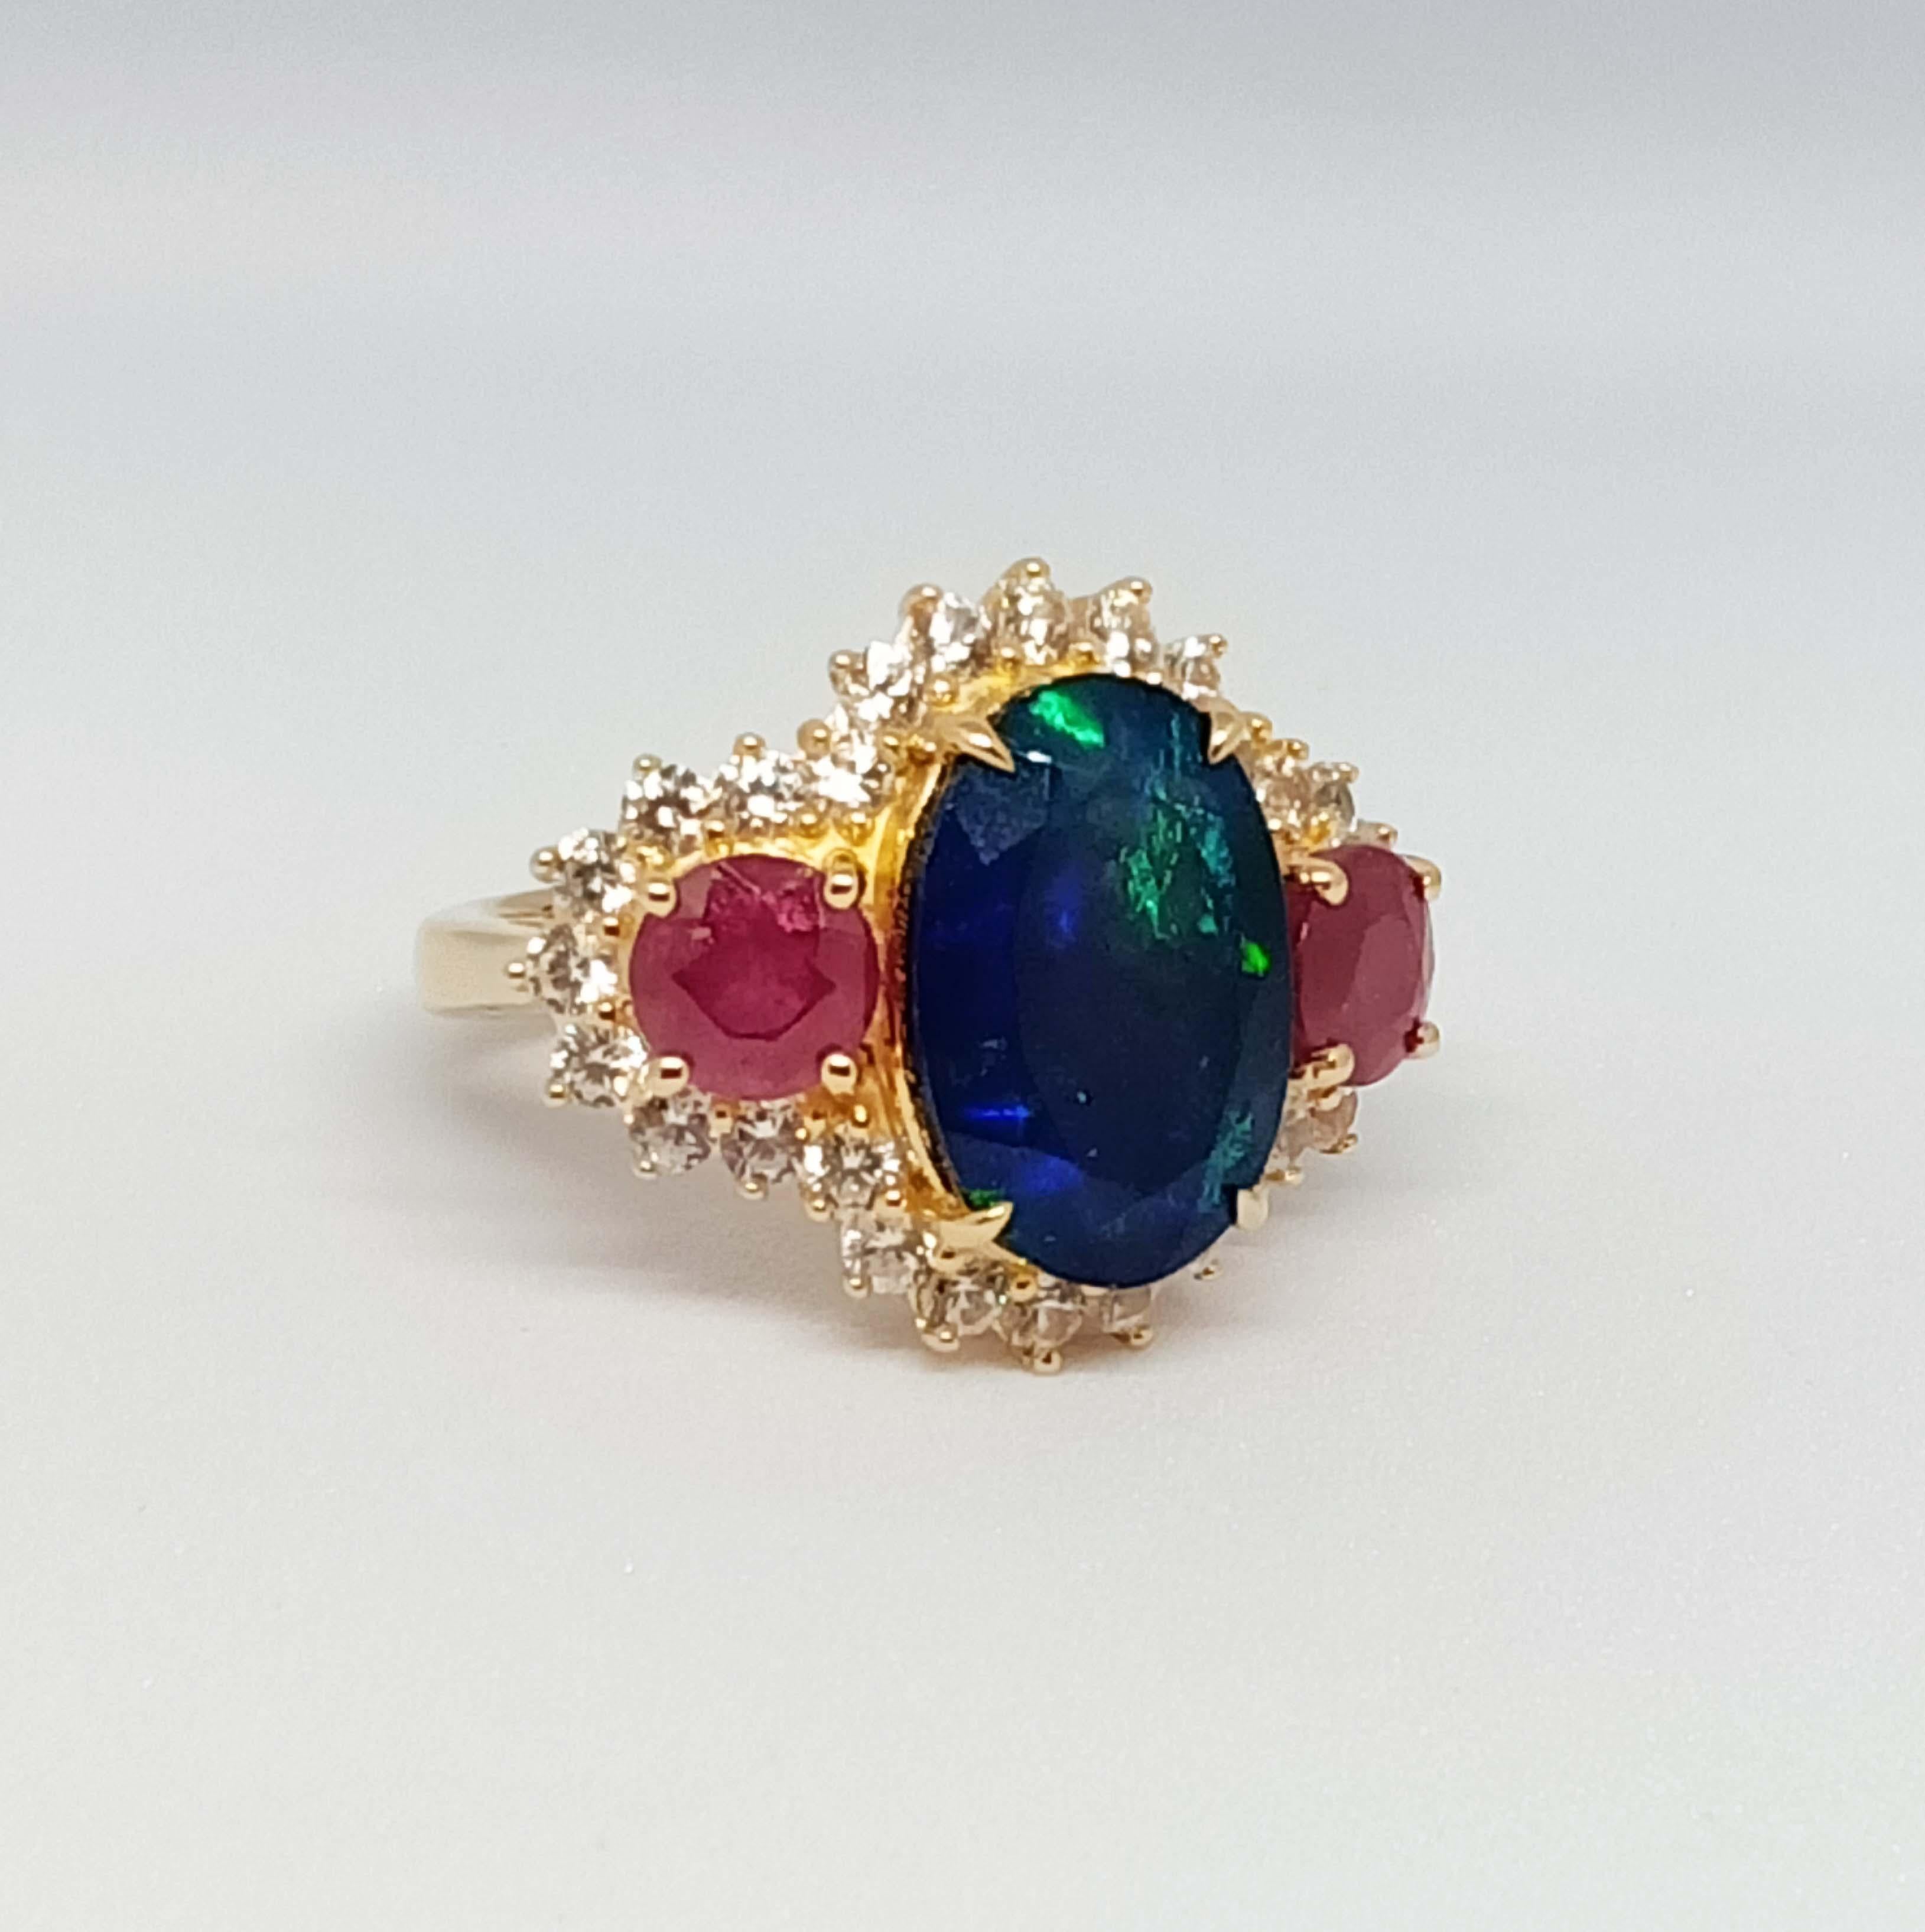 7.09 cts. Black Opal Ring. Sterling silver on 18K Gold Plated 1